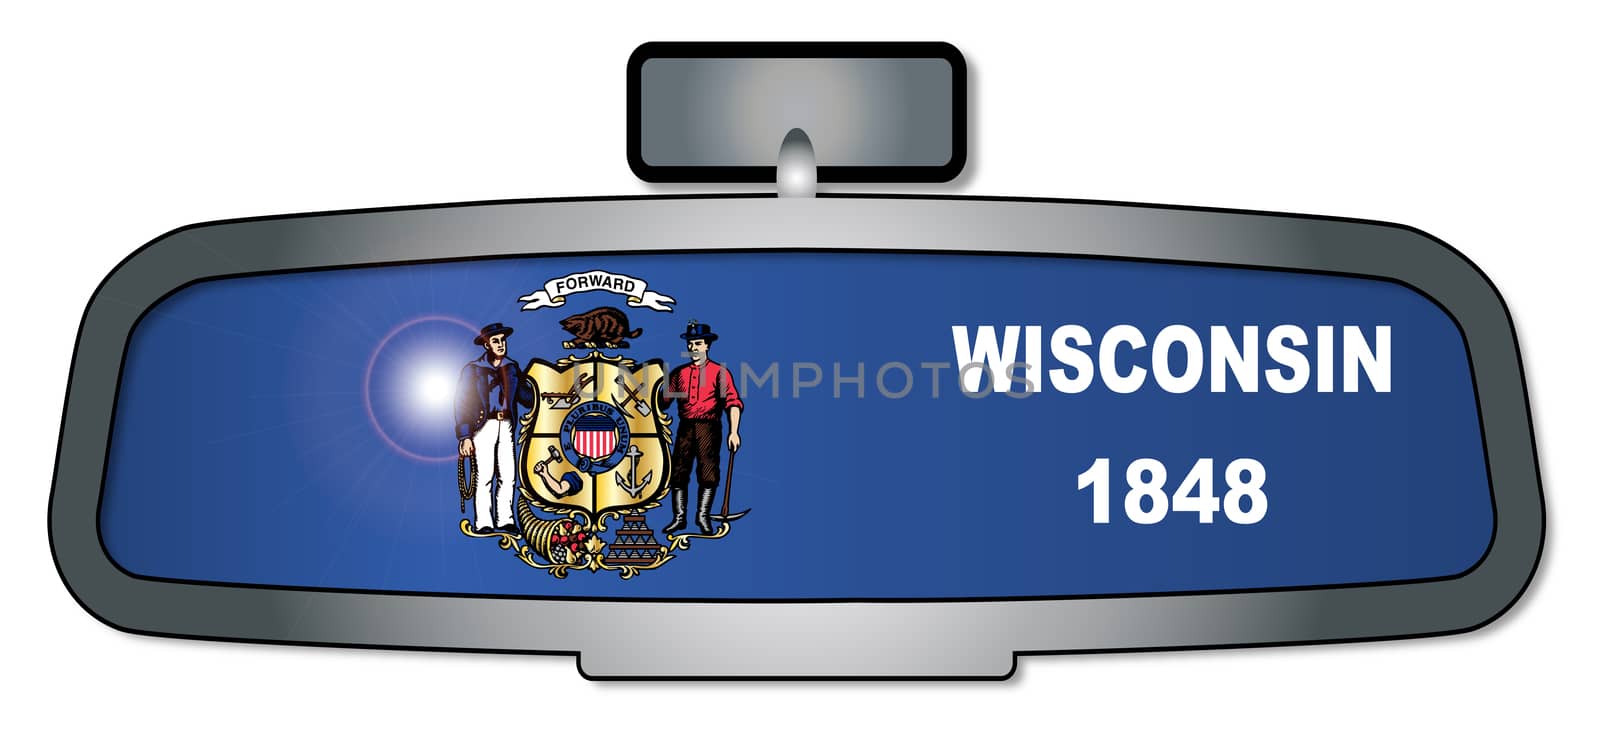 A vehicle rear view mirror with the flag of the state of Wisconsin